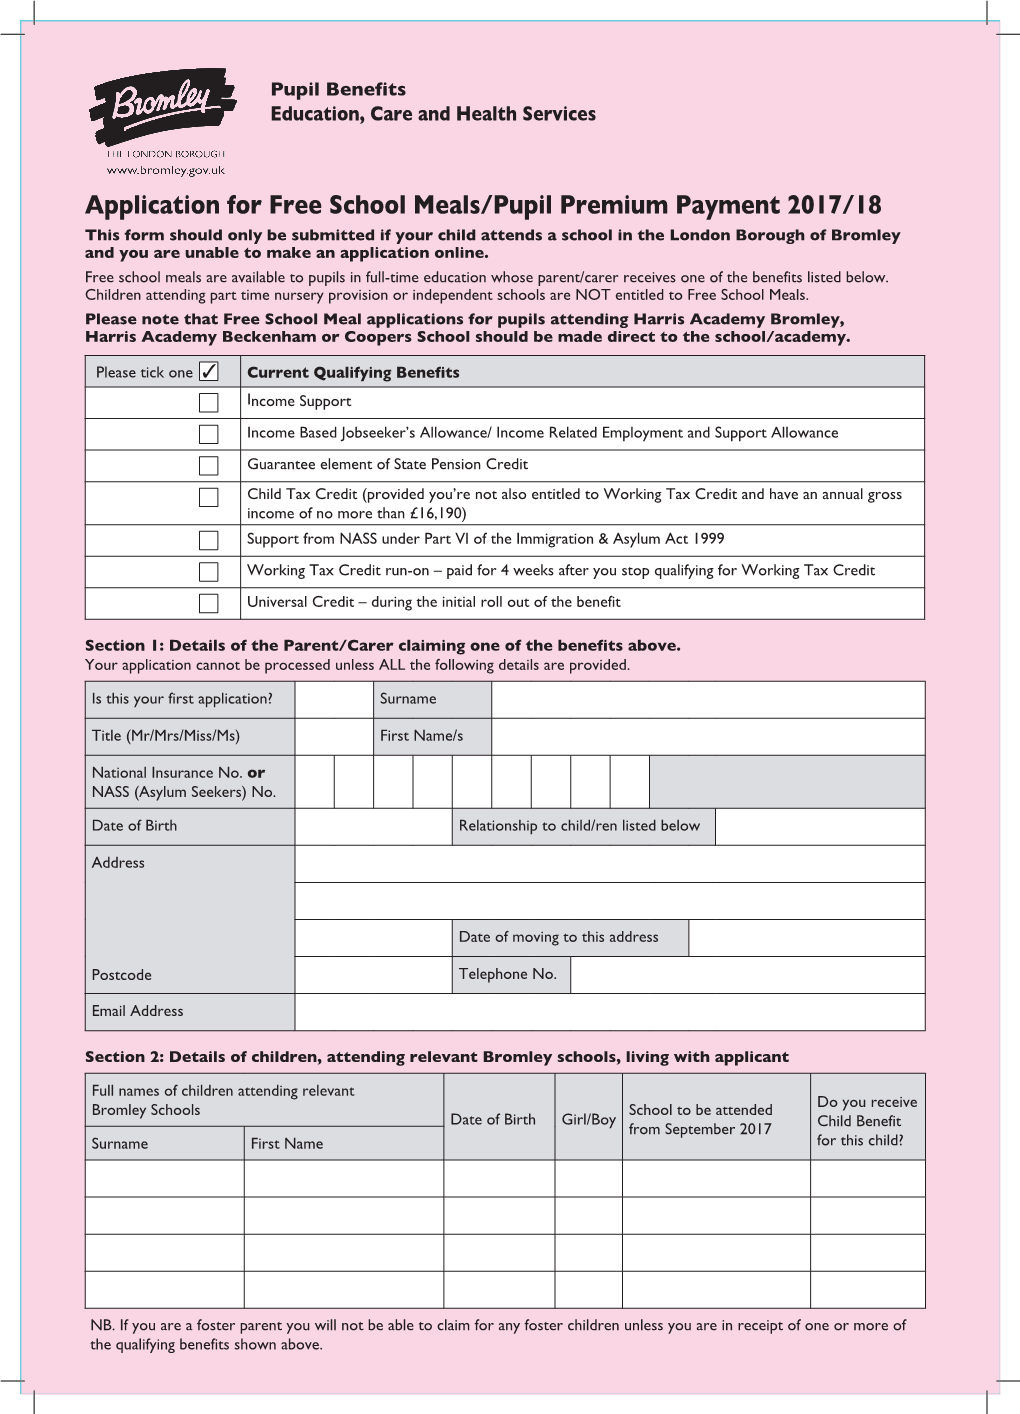 Application for Free School Meals/Pupil Premium Payment